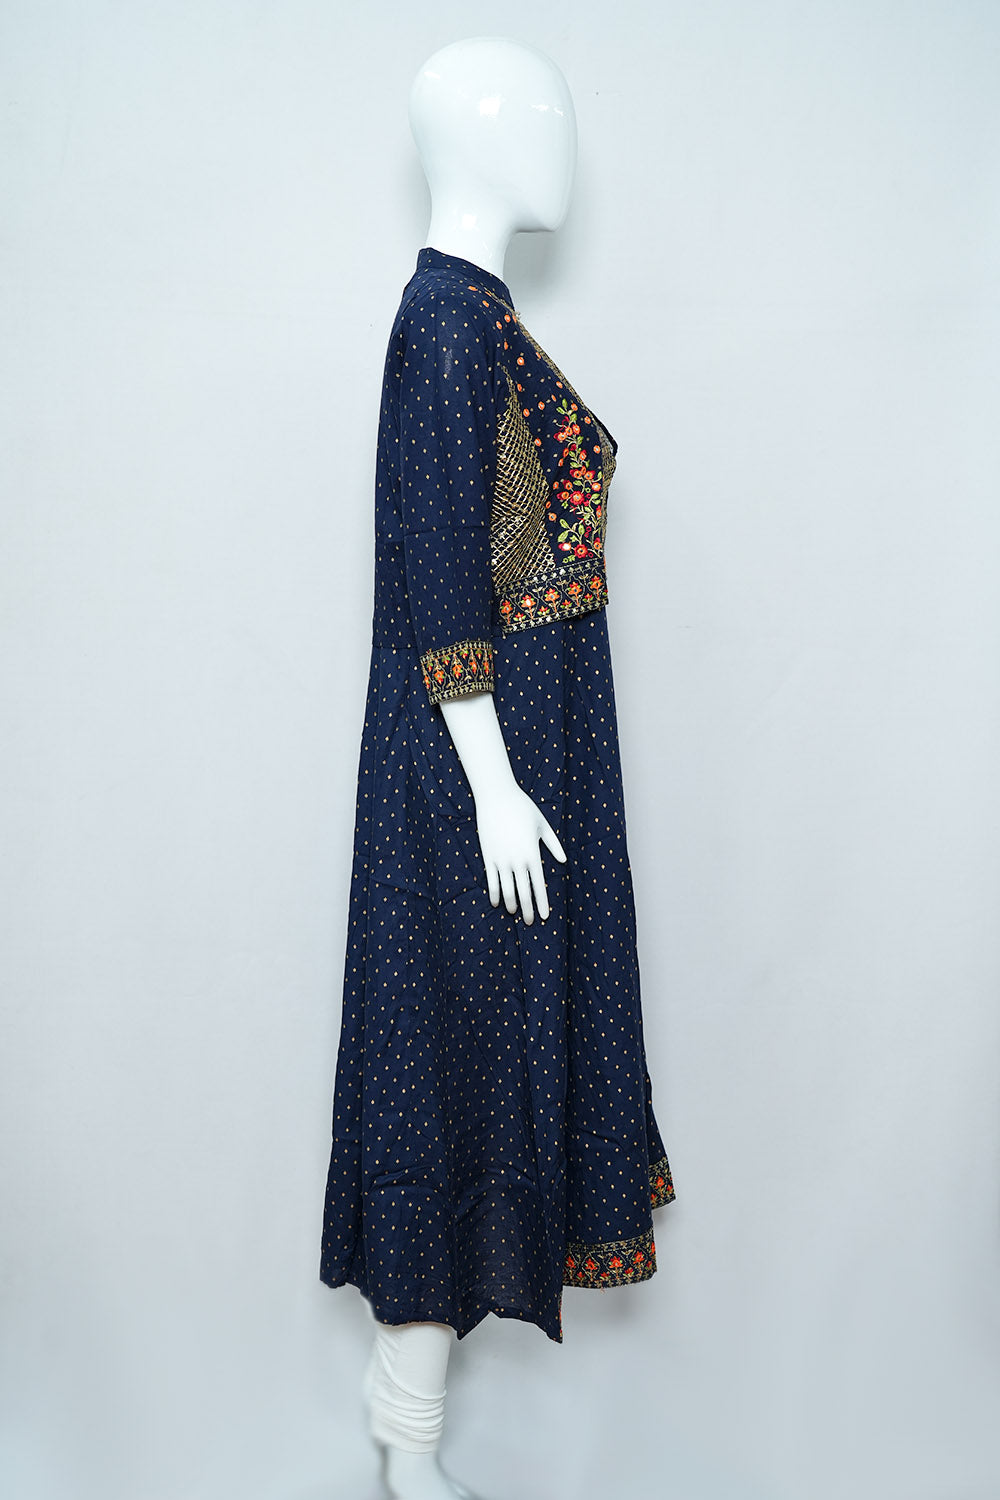 Navy Blue Color Embroidered Kurti